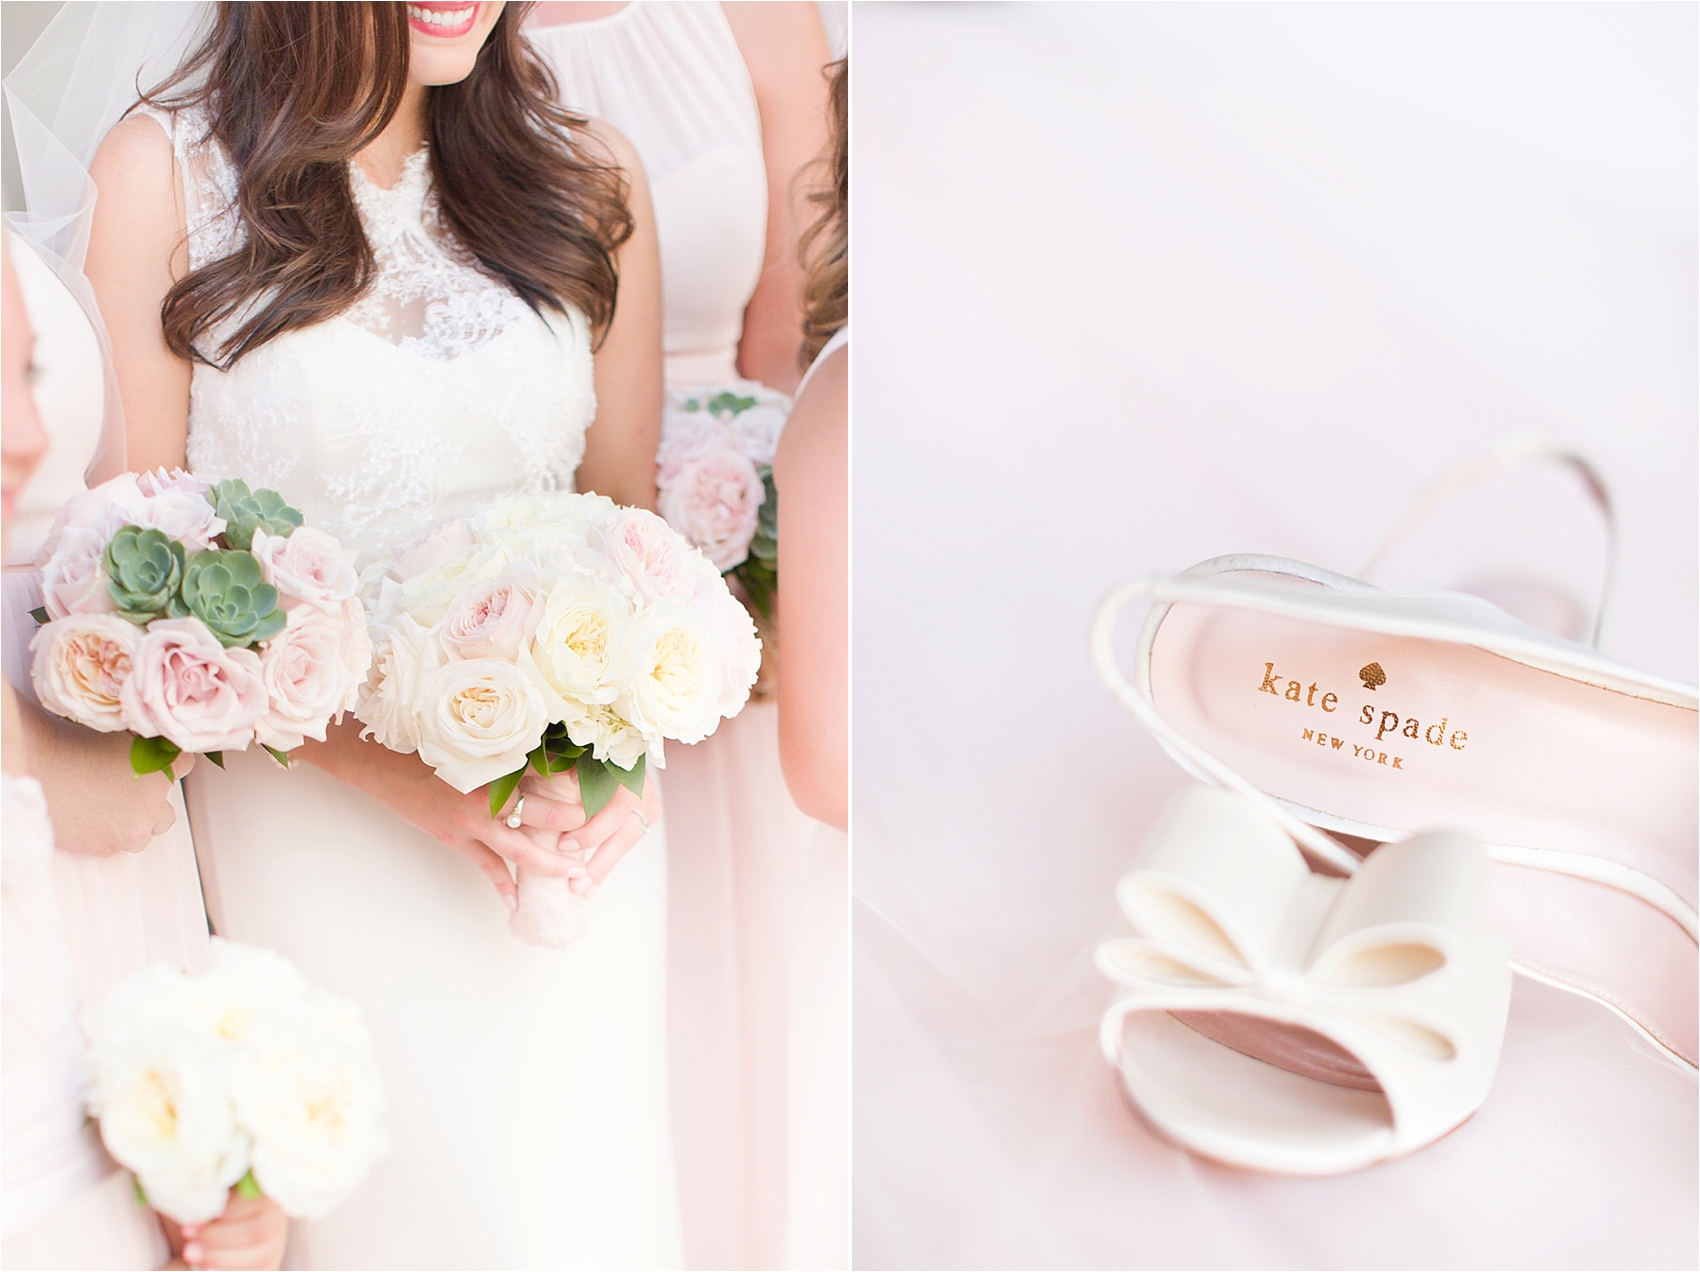 Sanctuary Wedding, Blush Pink and White Kate Spade Shoes and Succulent Bouquets